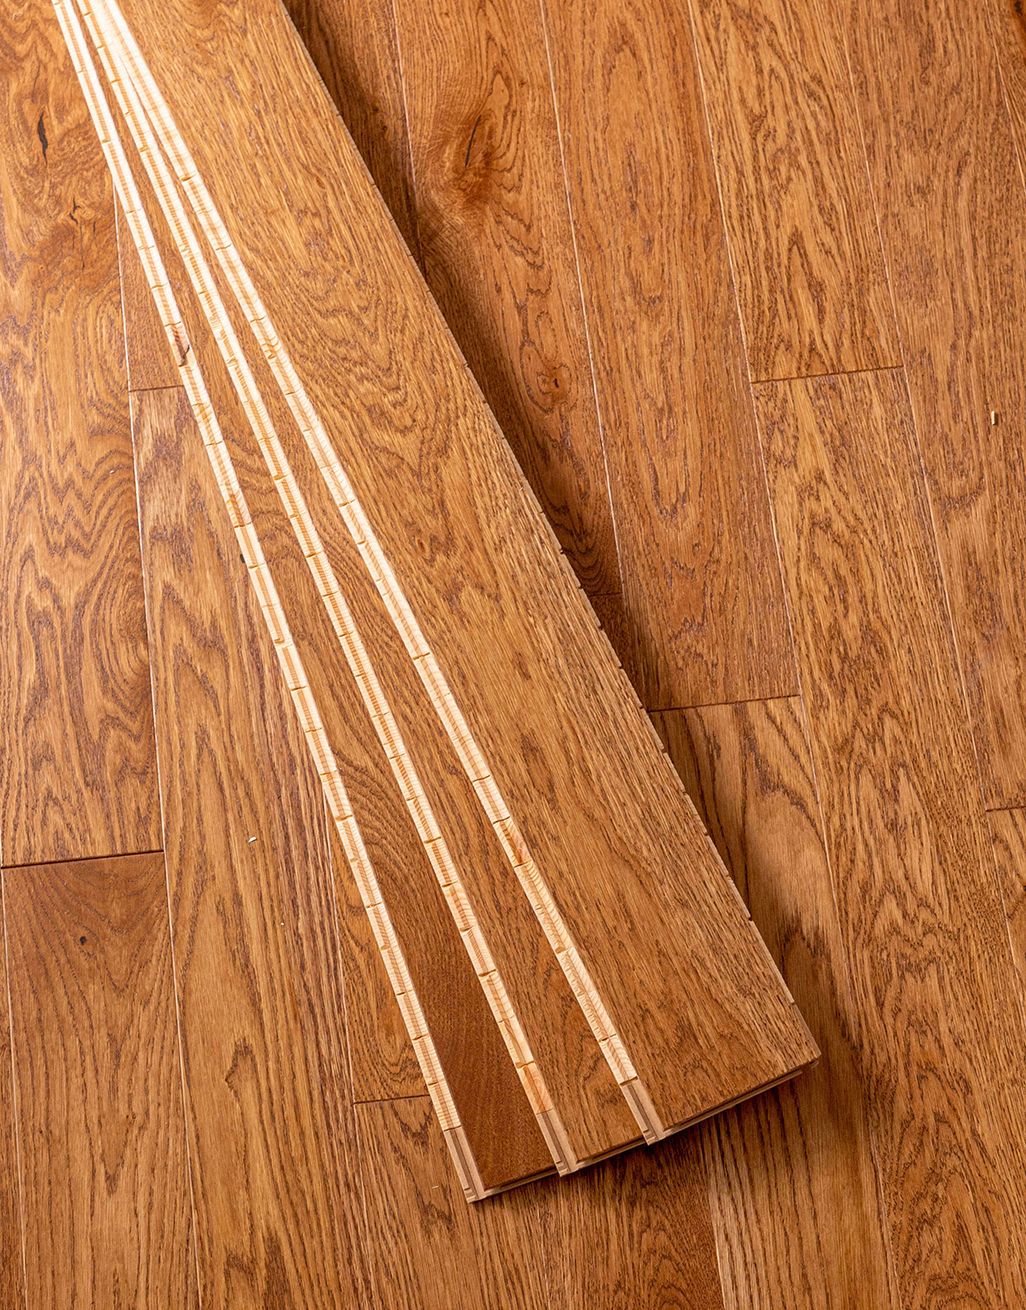 Carpenters Choice 110mm Golden Oak Brushed & Lacquered Engineered Wood Flooring 3